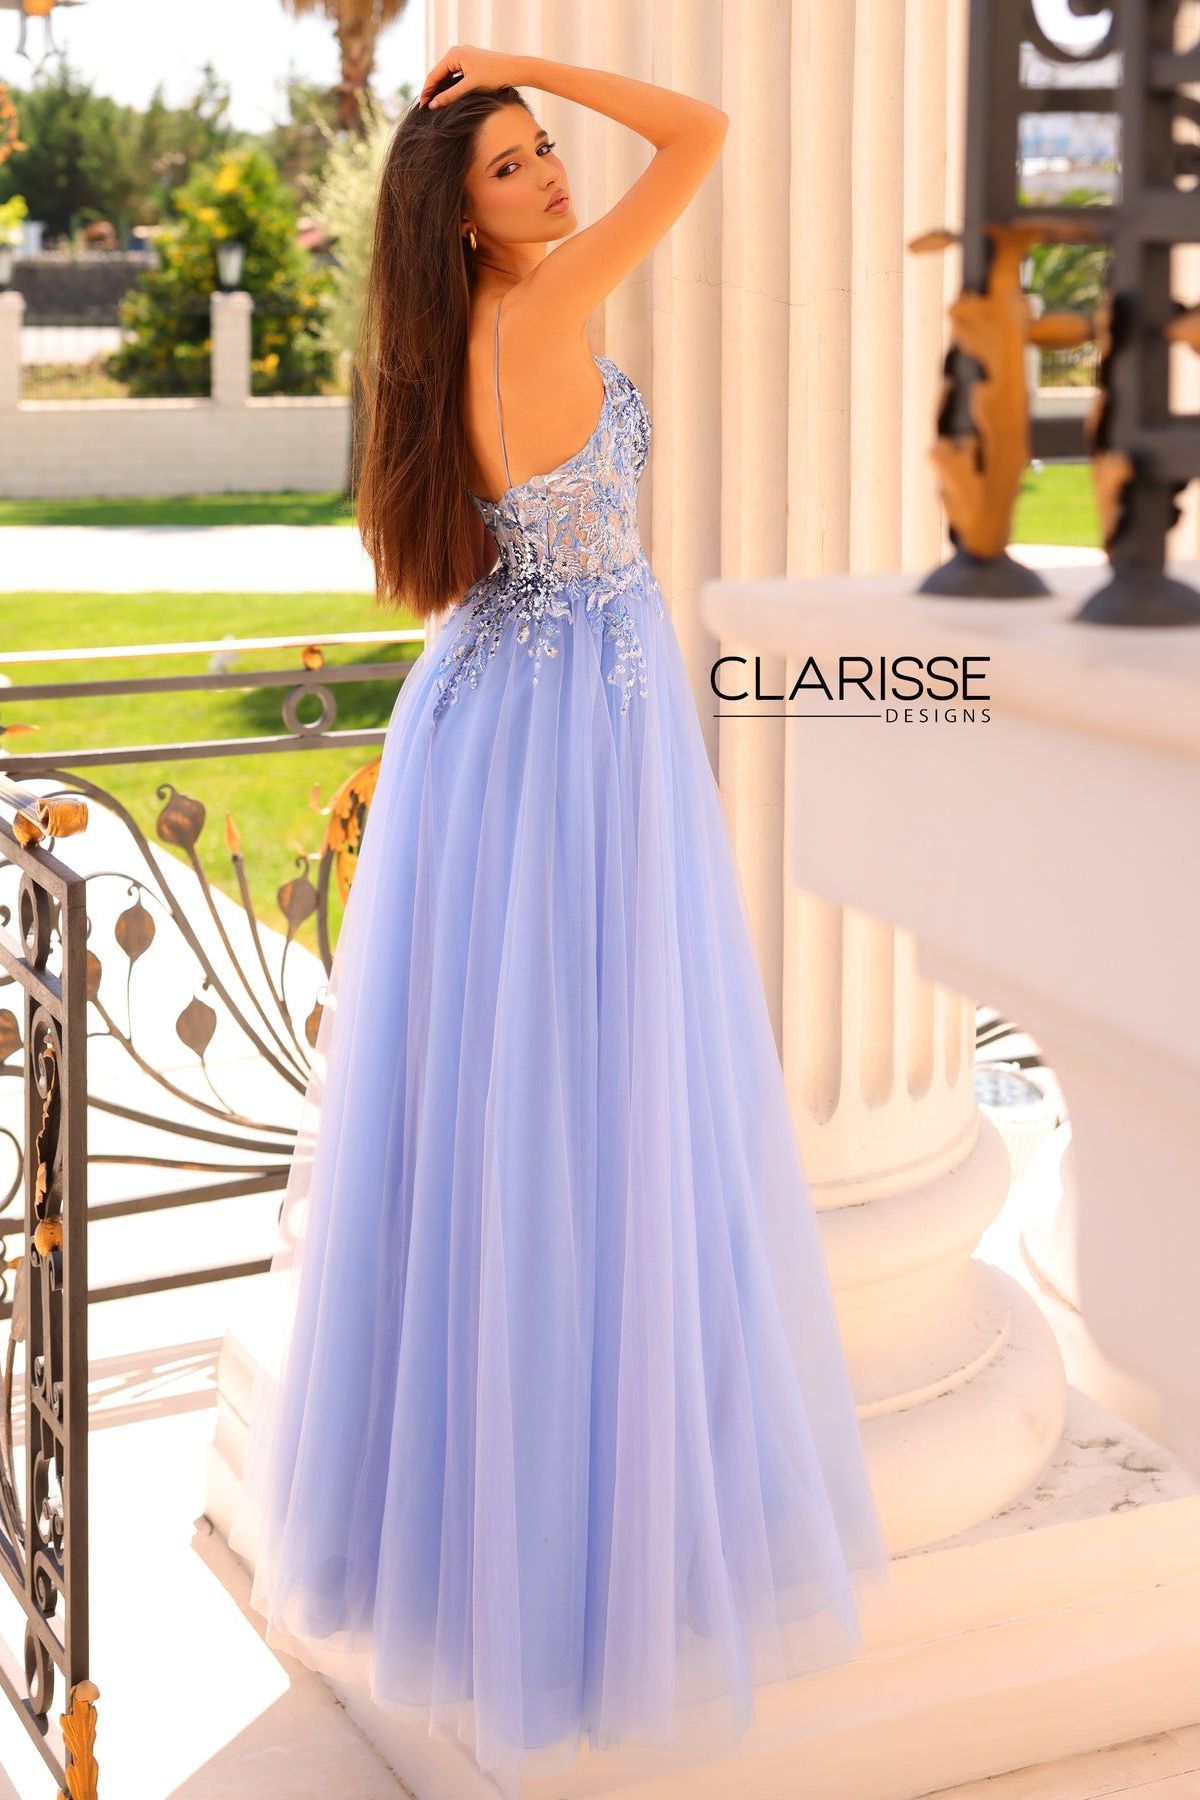 Clarisse -810794 Beaded Corset Plunging V-Neck Prom Gown